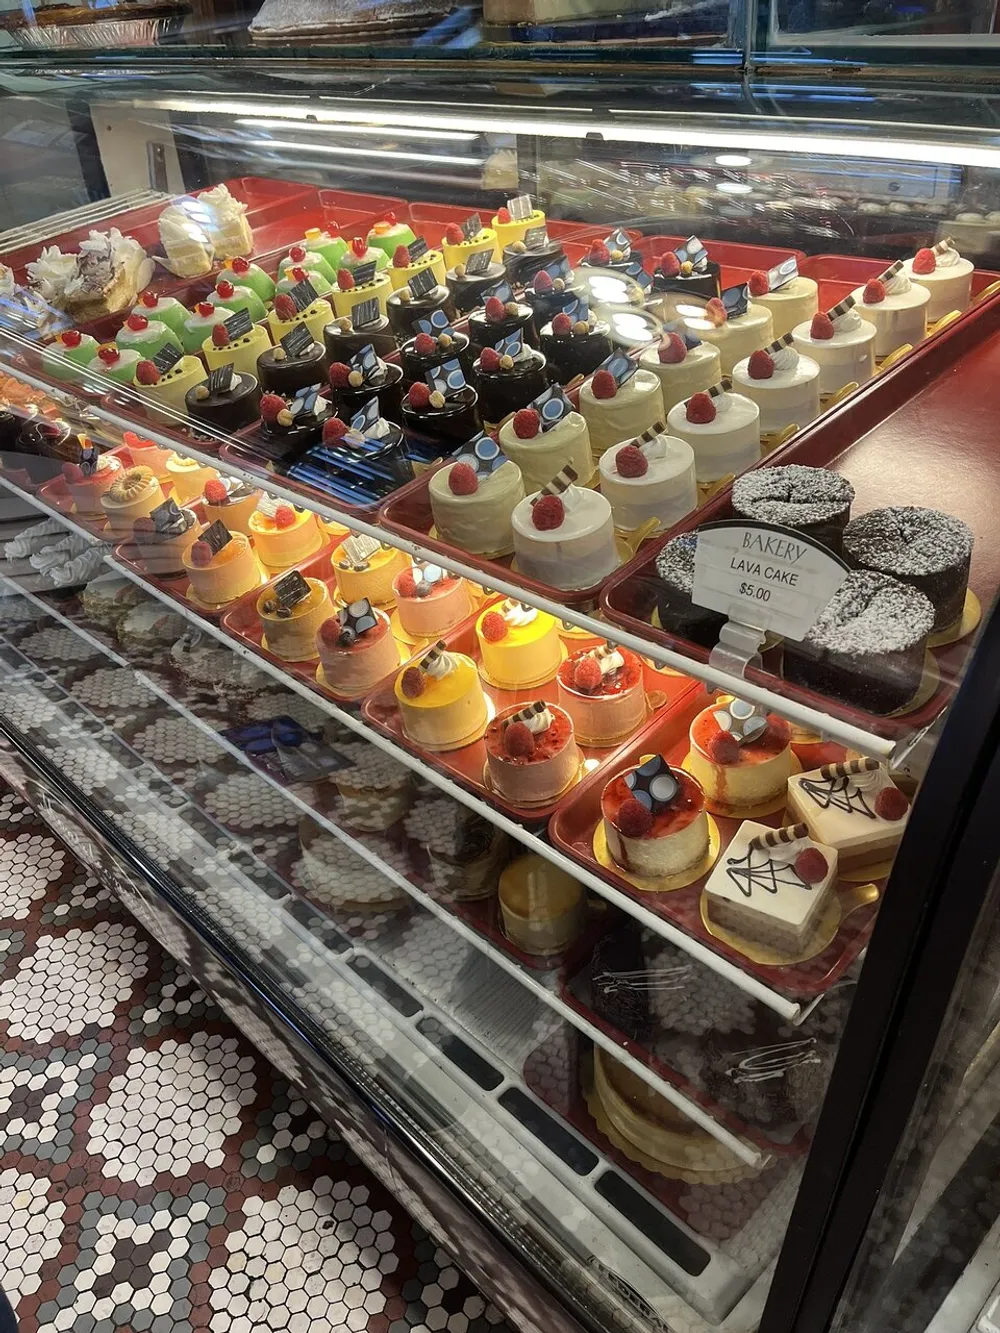 A bakery display case filled with an array of colorful and tempting individual desserts including cakes and tarts topped with fruit and decorative elements